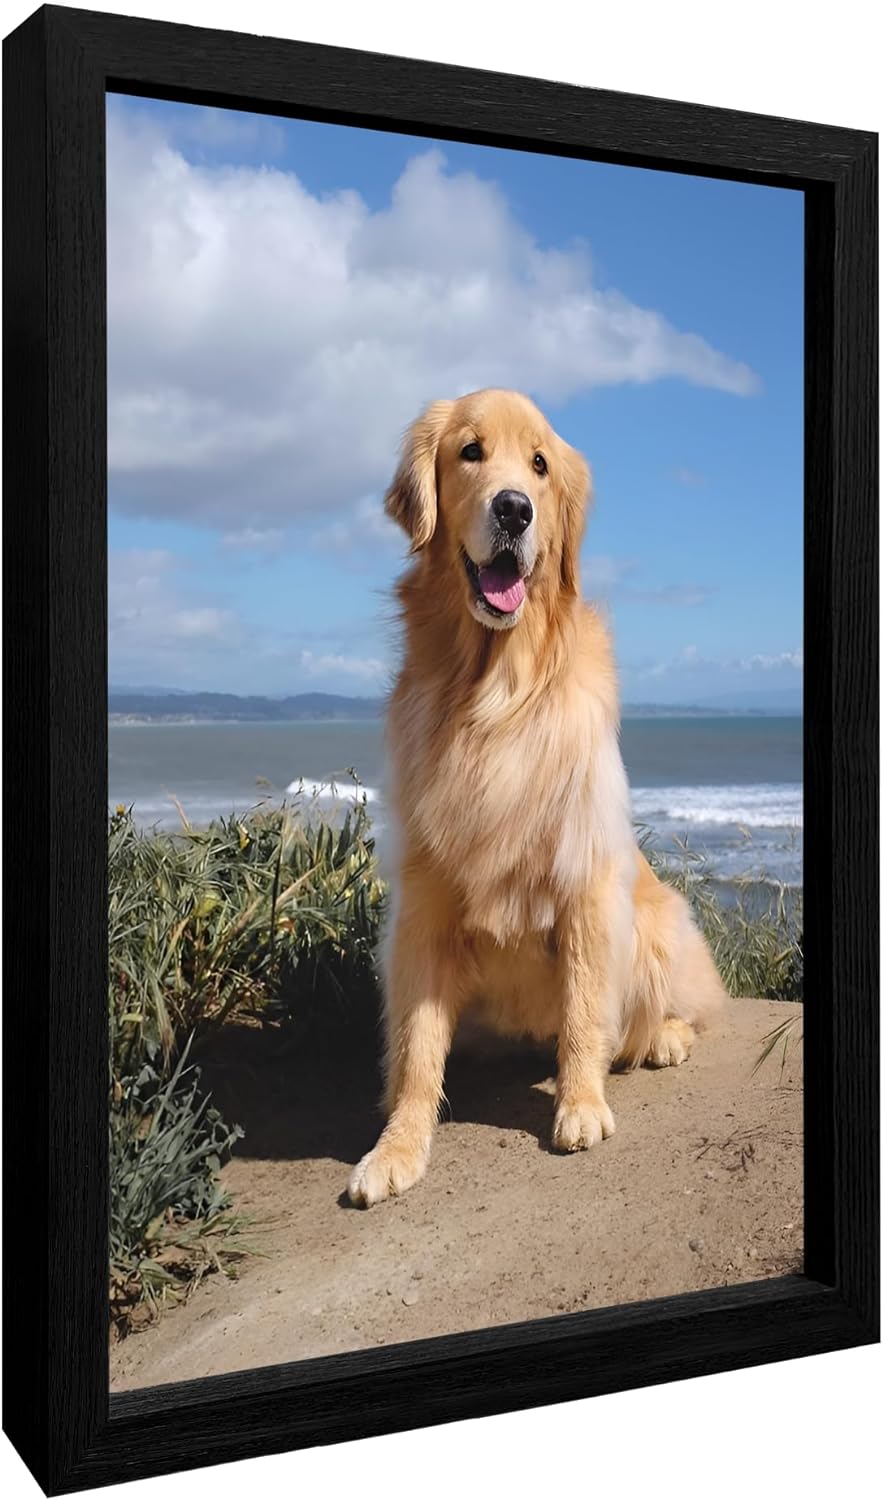 Custom Canvas Prints With Your Photos for Pet Family Photo Prints Personalized Canvas Framed Wall Art (10 x 8, Wood Black)